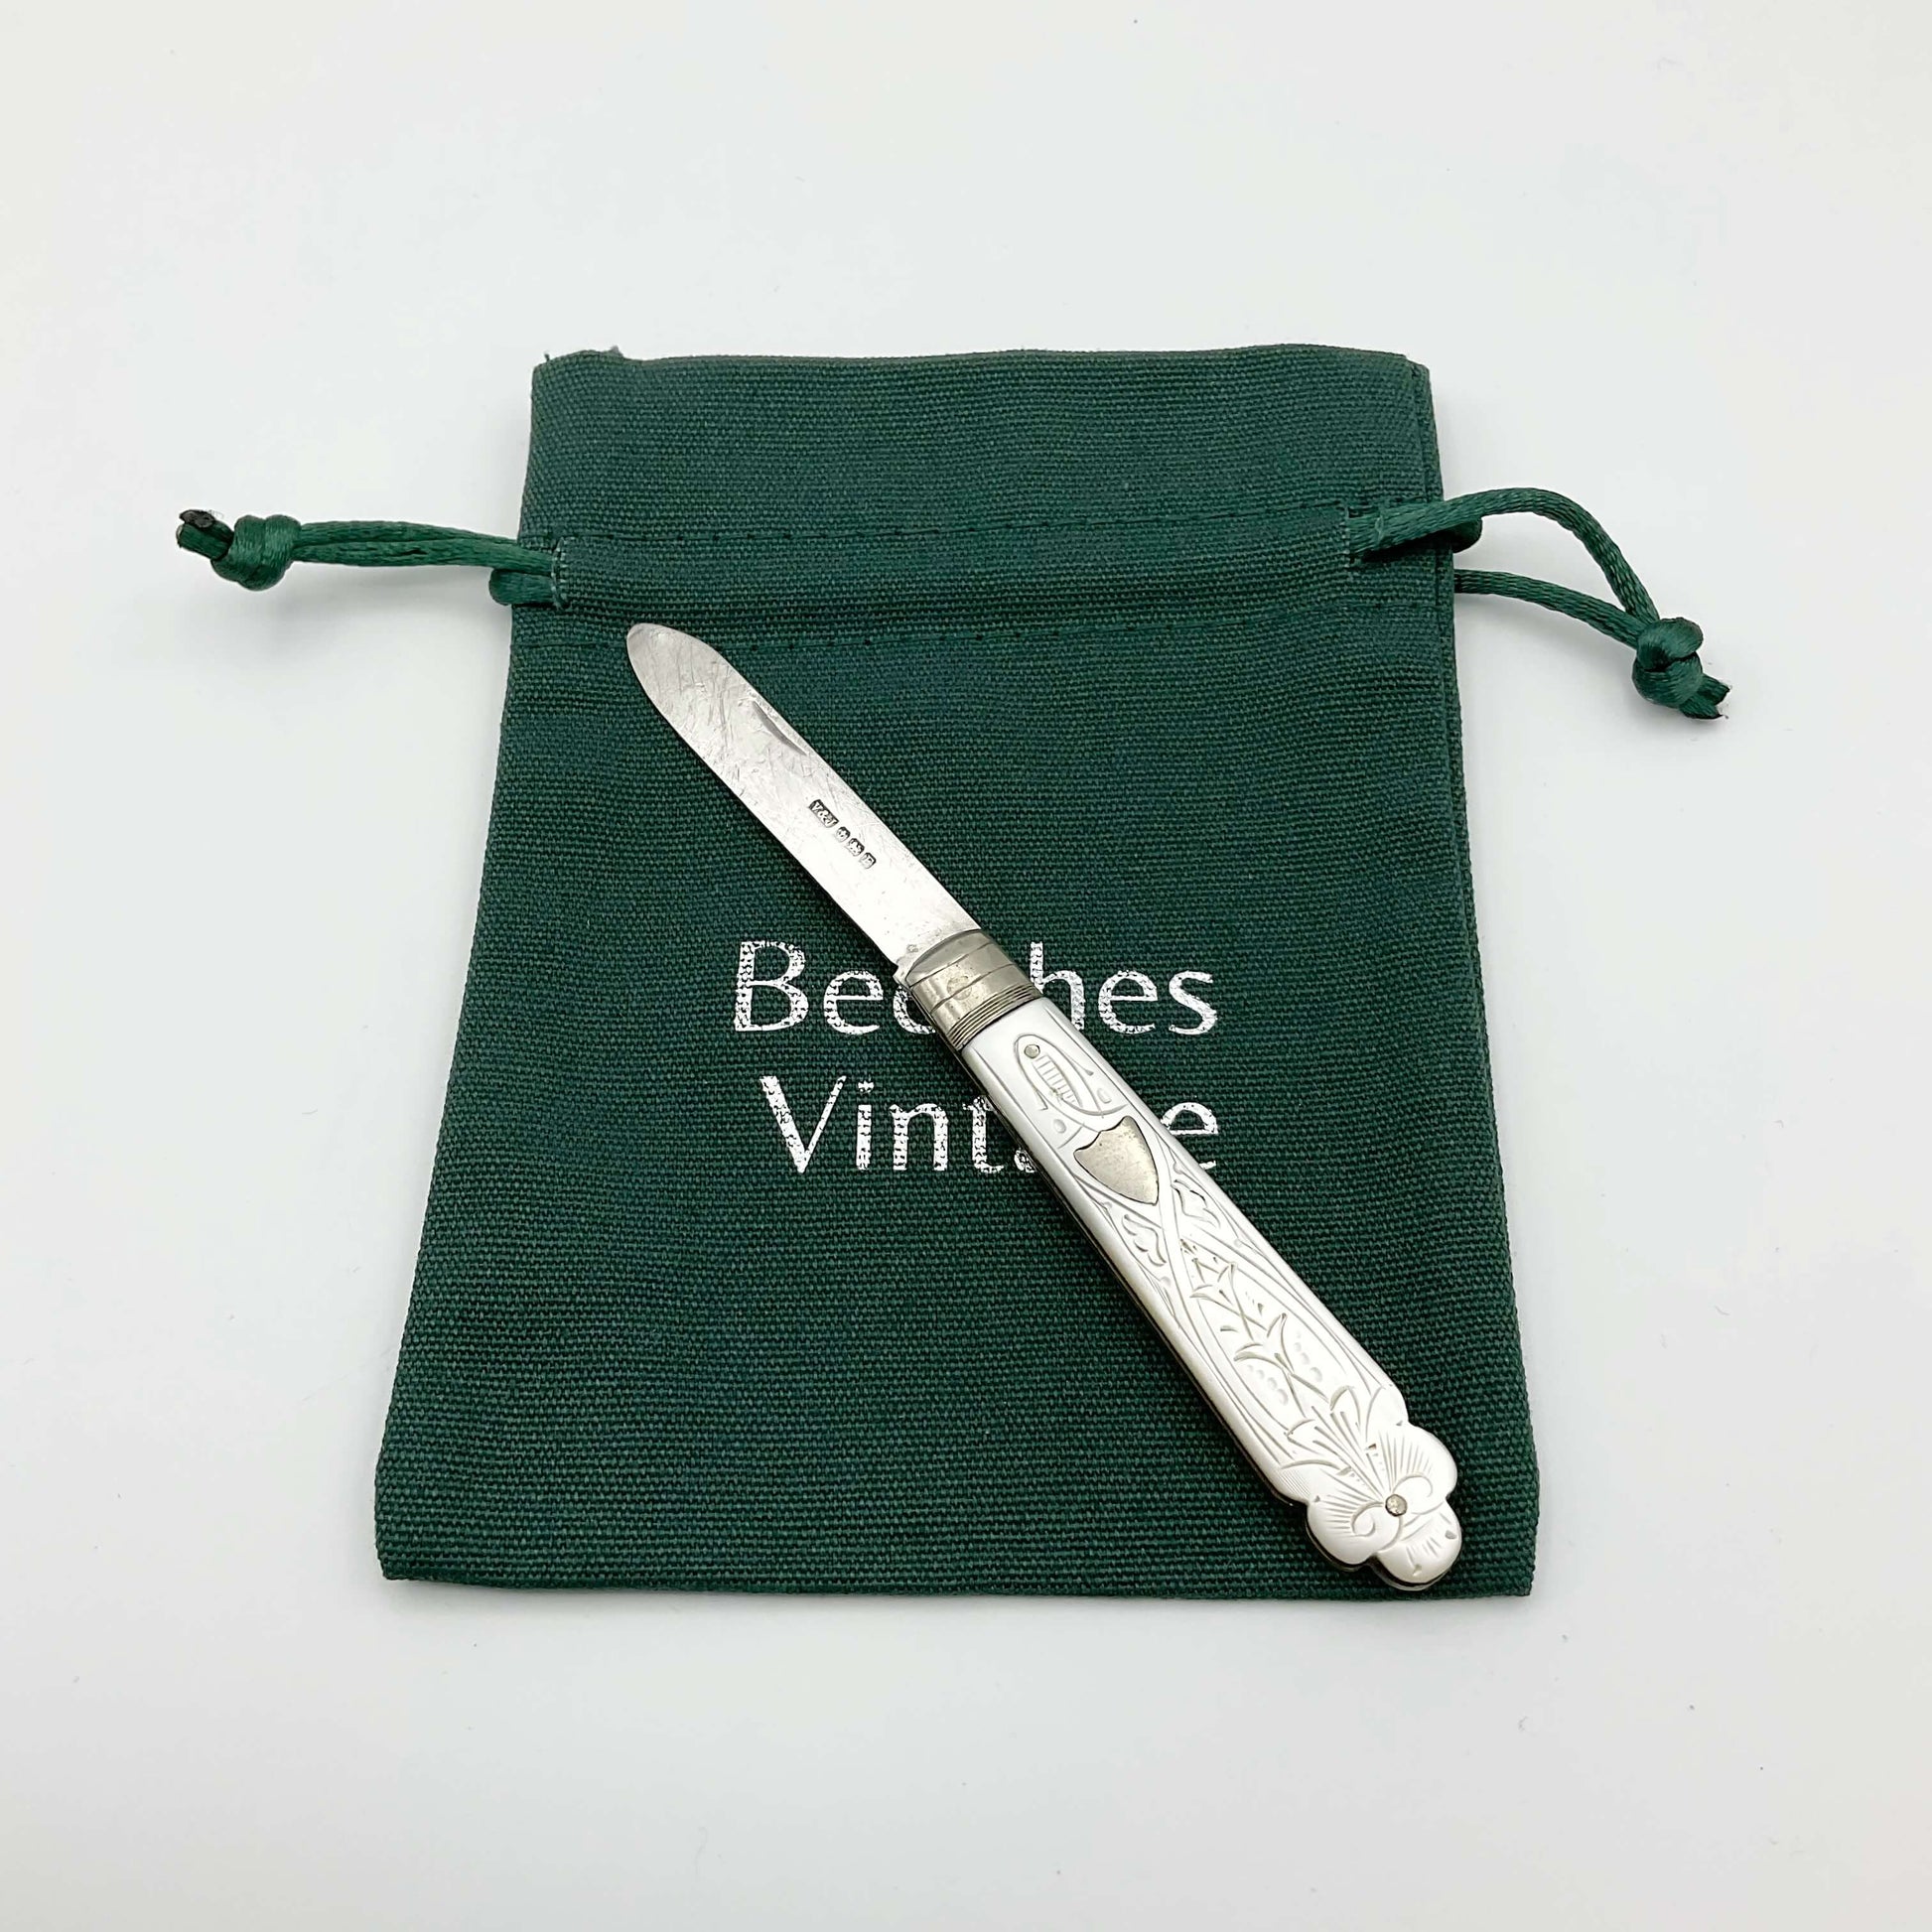 Vintage silver fruit knife with a beautifully engraved mother of pearl handle on a green gift bag